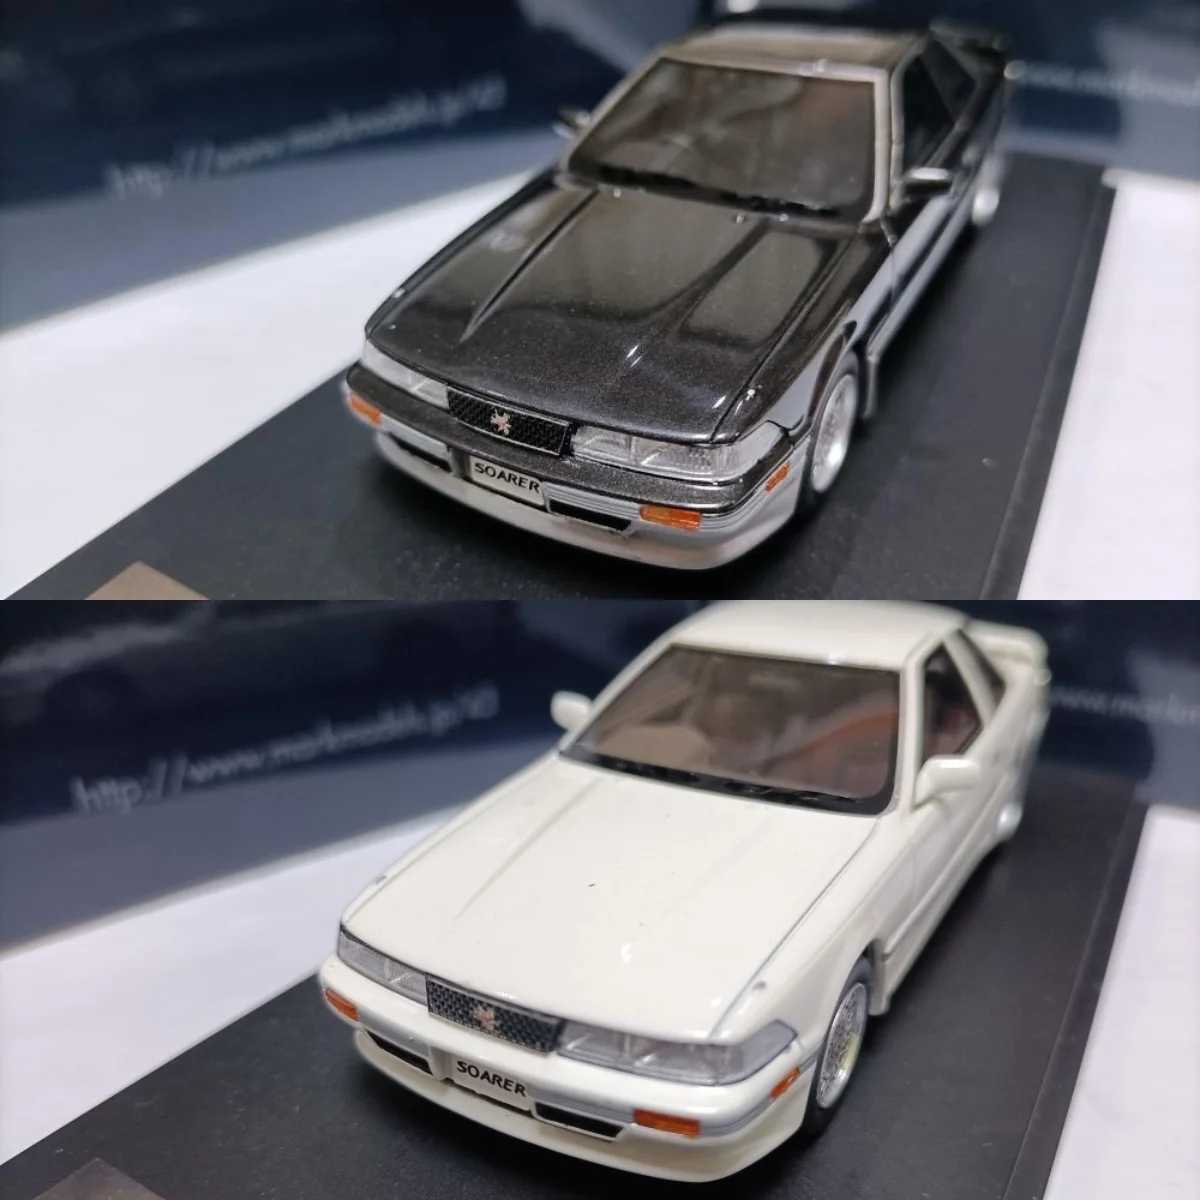 

Mark43 1:43 For Soarer 2.0GT TwinTurbo GZ20 1986 JDM Simulation Limited Edition Resin Metal Static Car Model Toy Gift